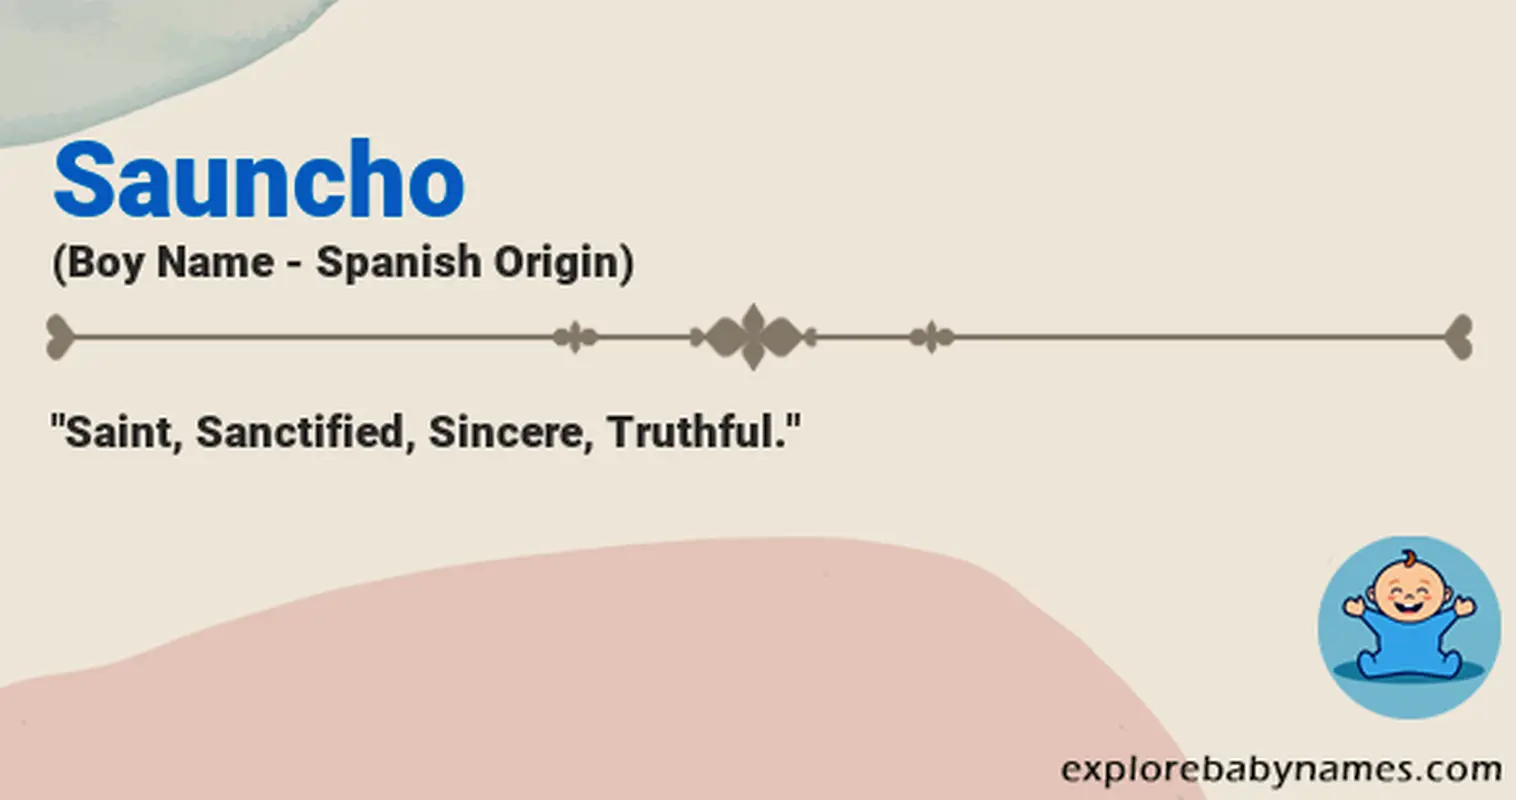 Meaning of Sauncho